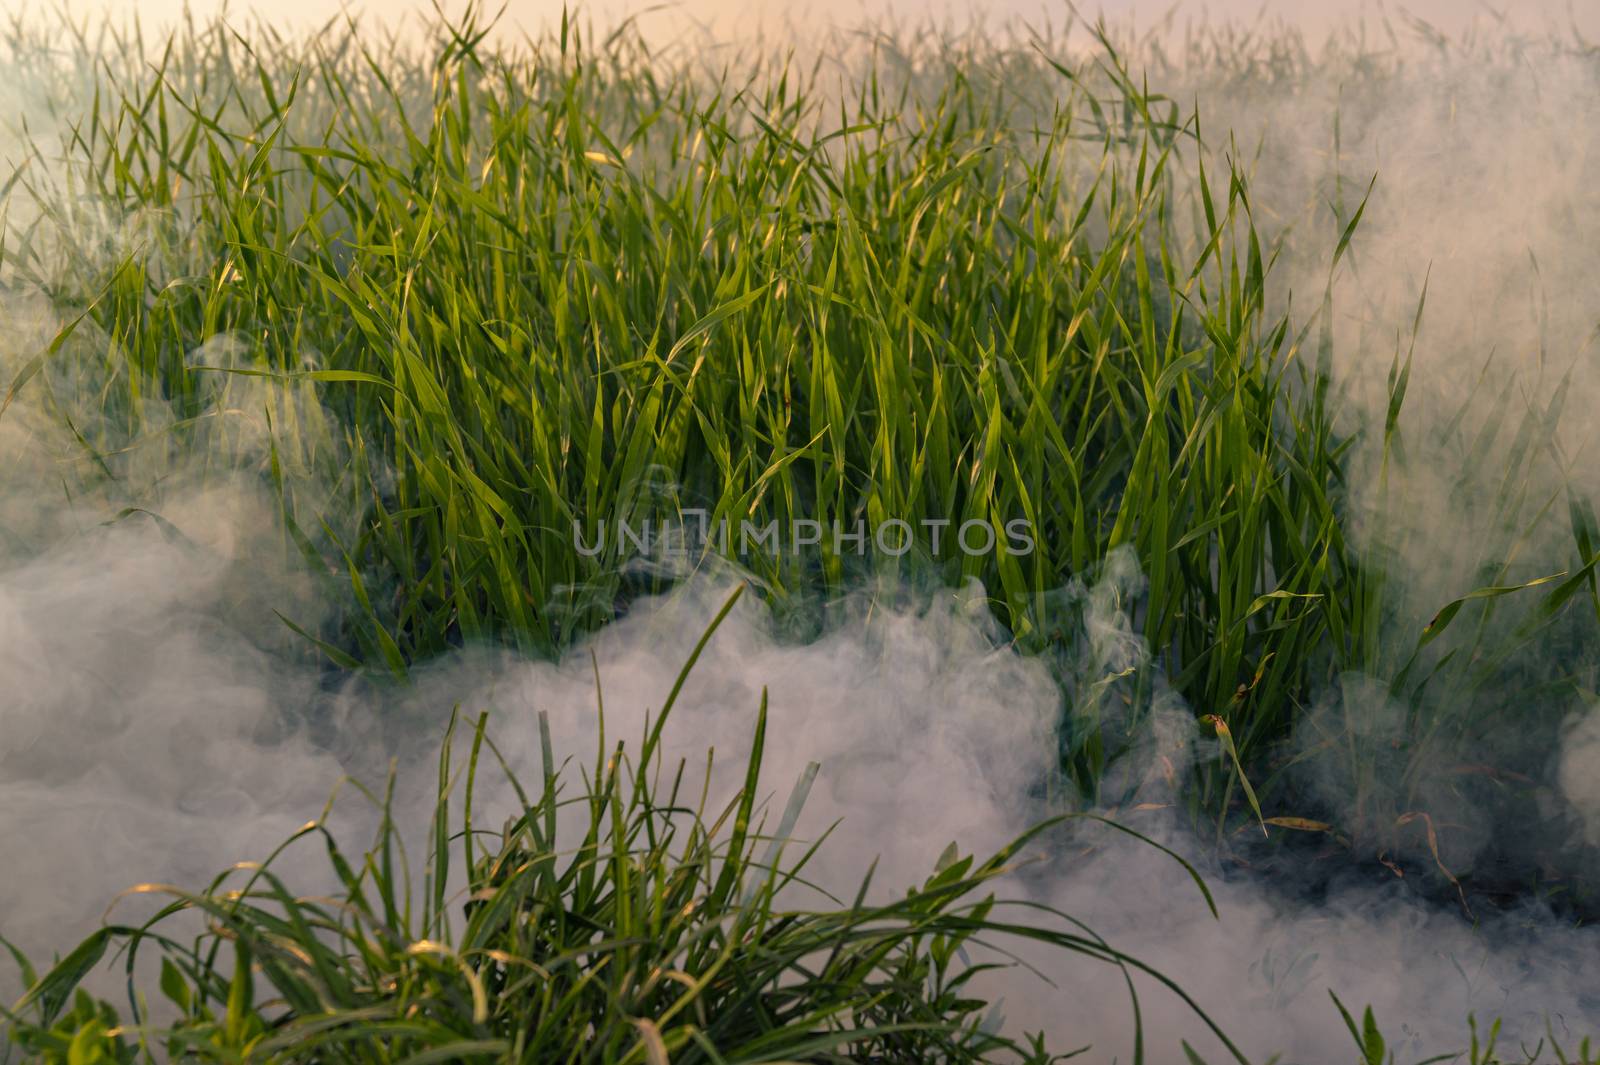 The silver smoke in grass by alexsdriver